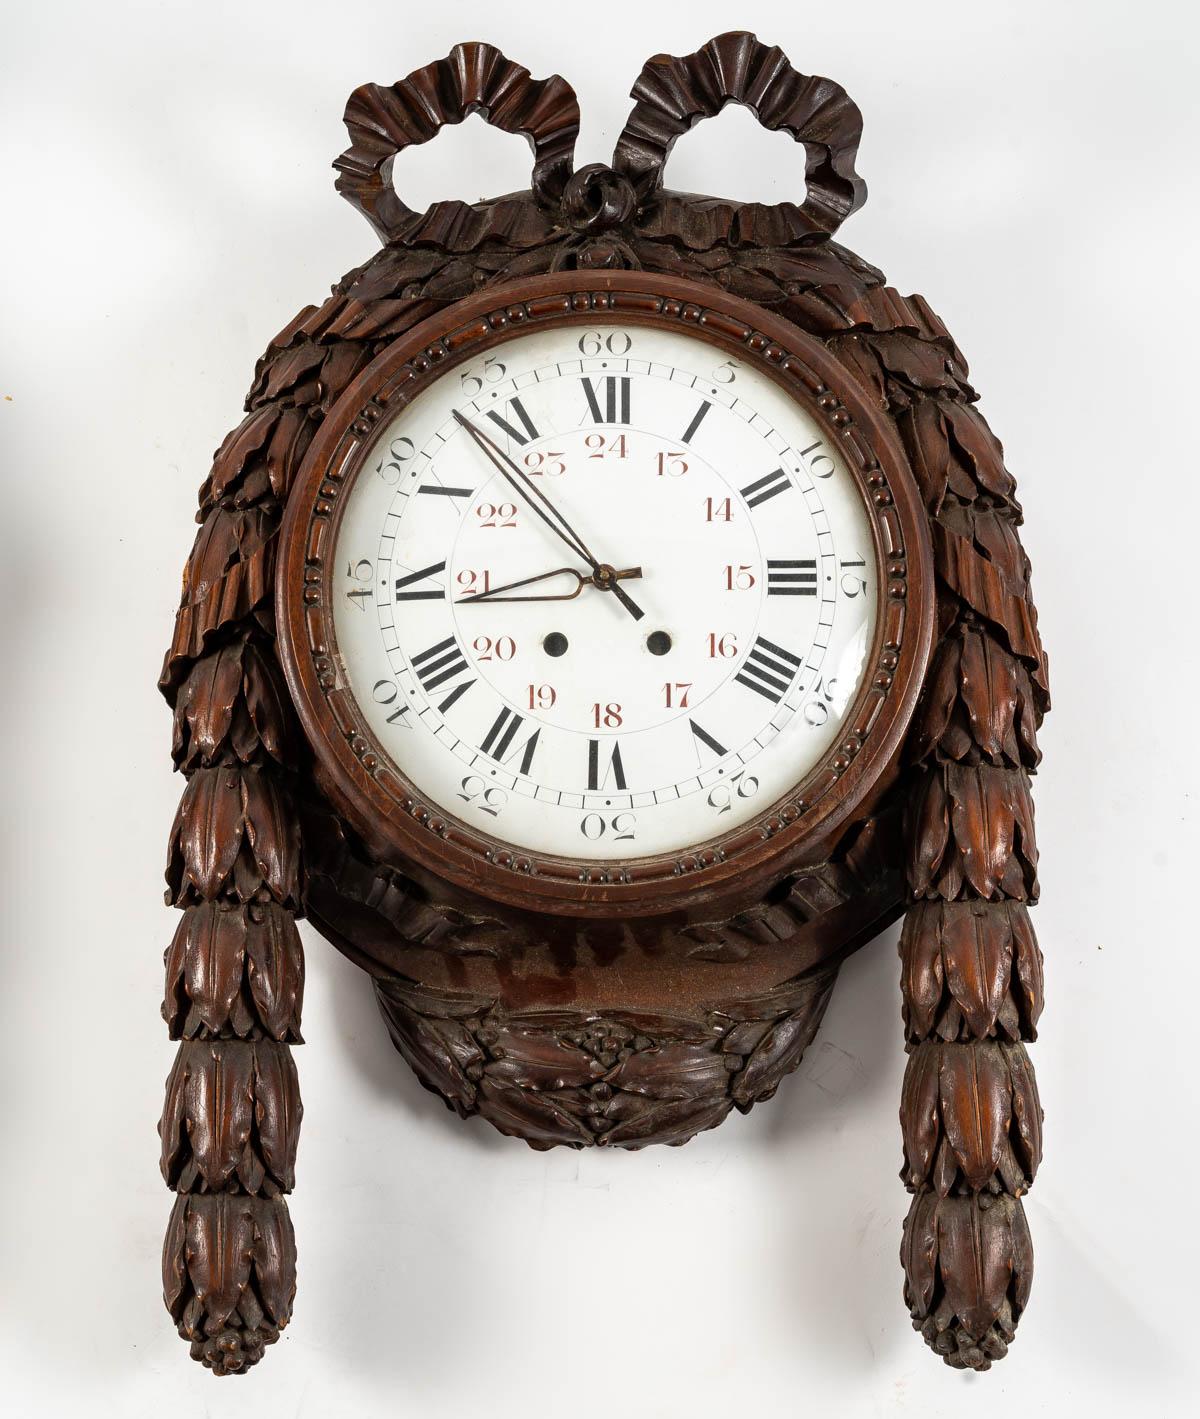 Set of a barometer and a clock, 19th century
Set of a barometer and a clock in carved wood, from the 19th century, Louis XVI style, Napoleon III period, great decoration.
The mechanism of the clock is missing, but it is possible on request to put